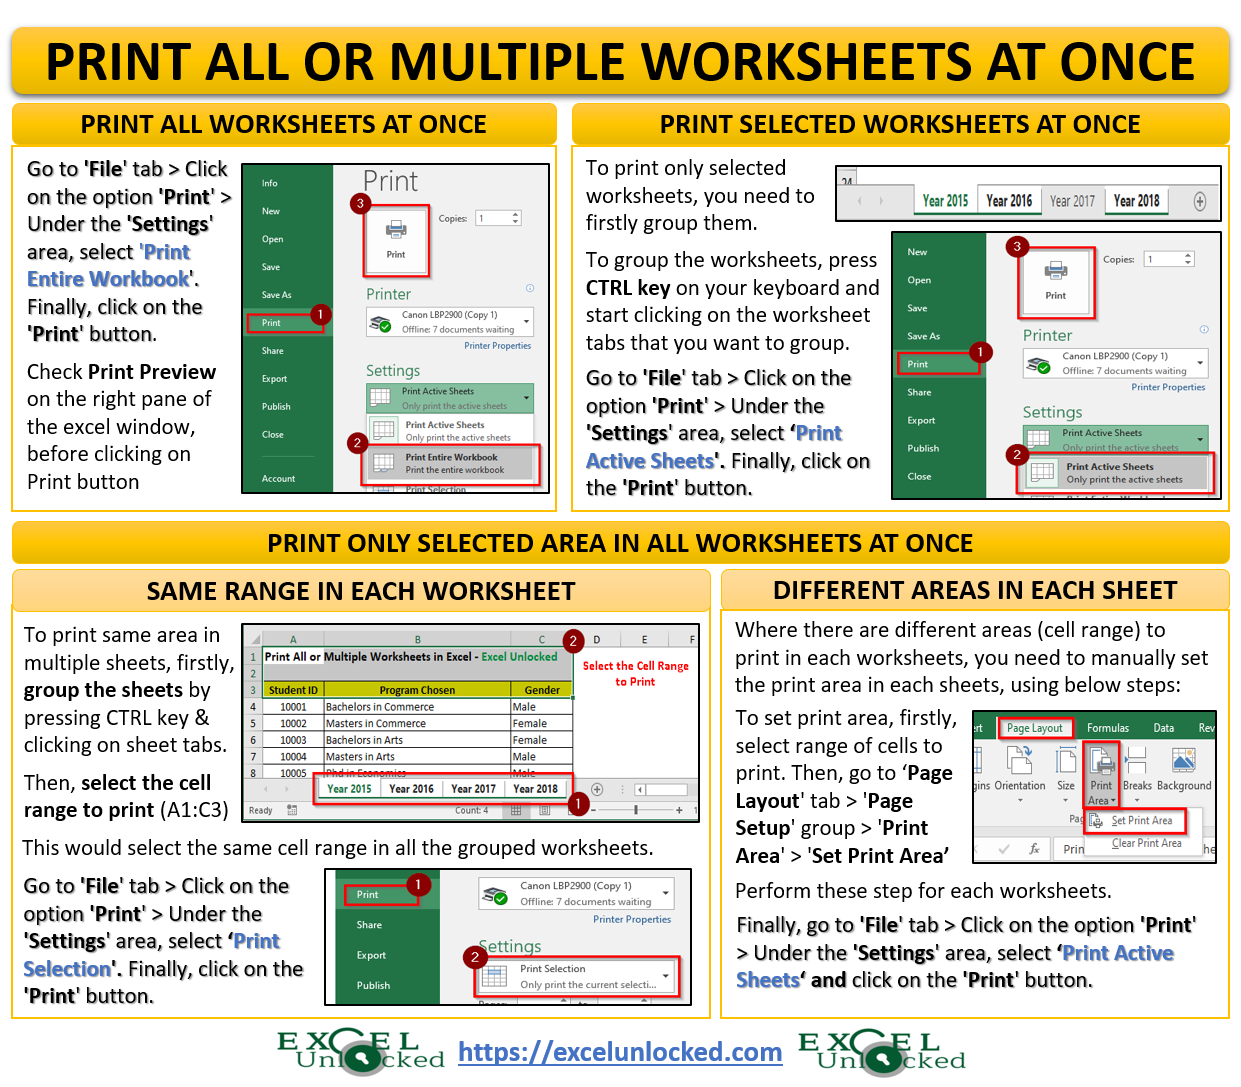 how-to-print-all-or-multiple-worksheets-in-excel-excel-unlocked